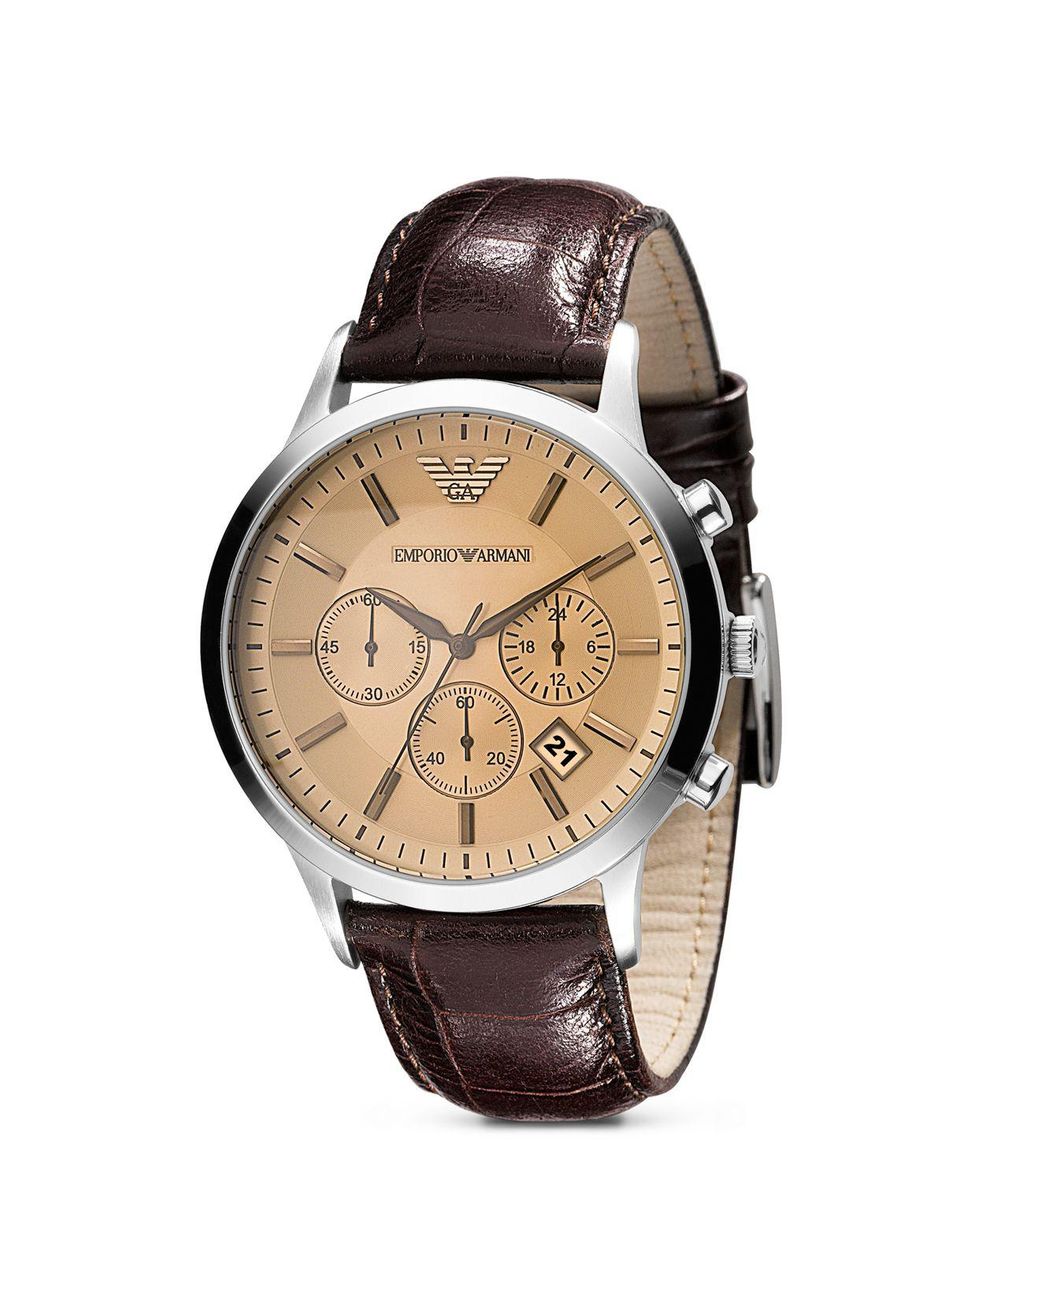 Lyst - Emporio Armani 43mm in Brown for Men - Save 13%